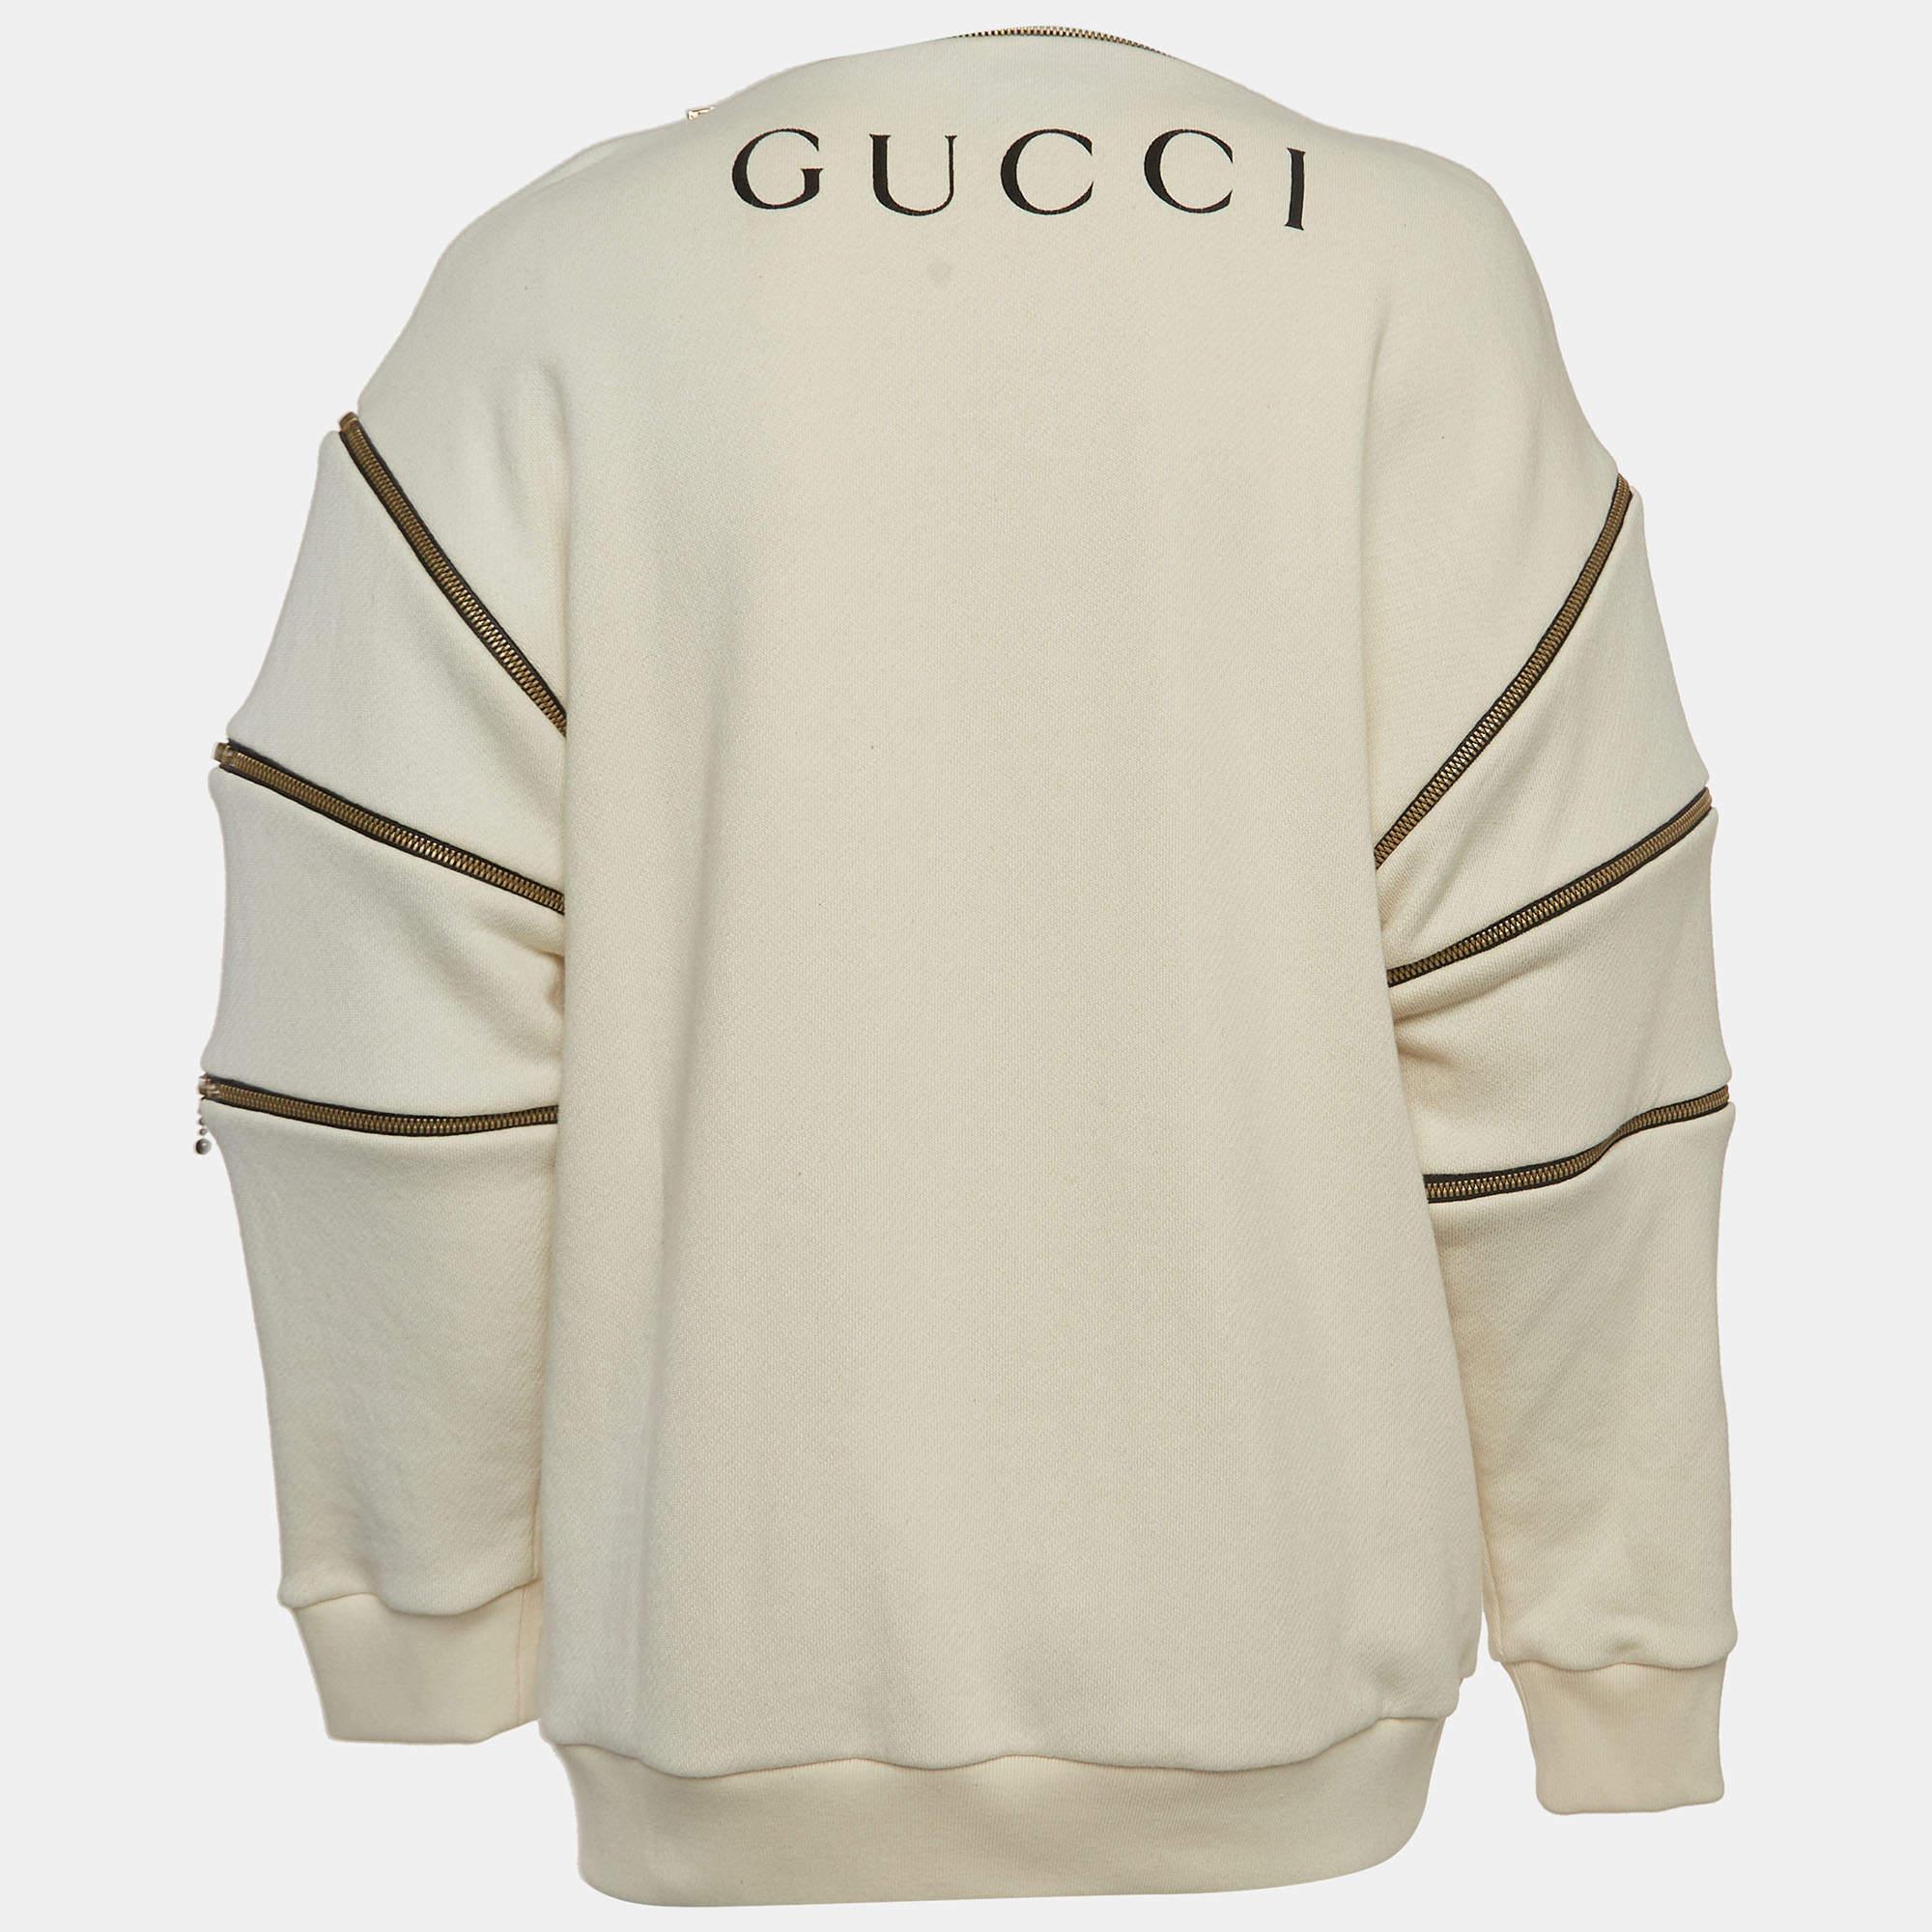 The Gucci sweatshirt is a fashion-forward blend of luxury and streetwear. Crafted from premium cotton, it features distinctive branding,zipper detail, and embodies contemporary style with timeless Gucci sophistication.

